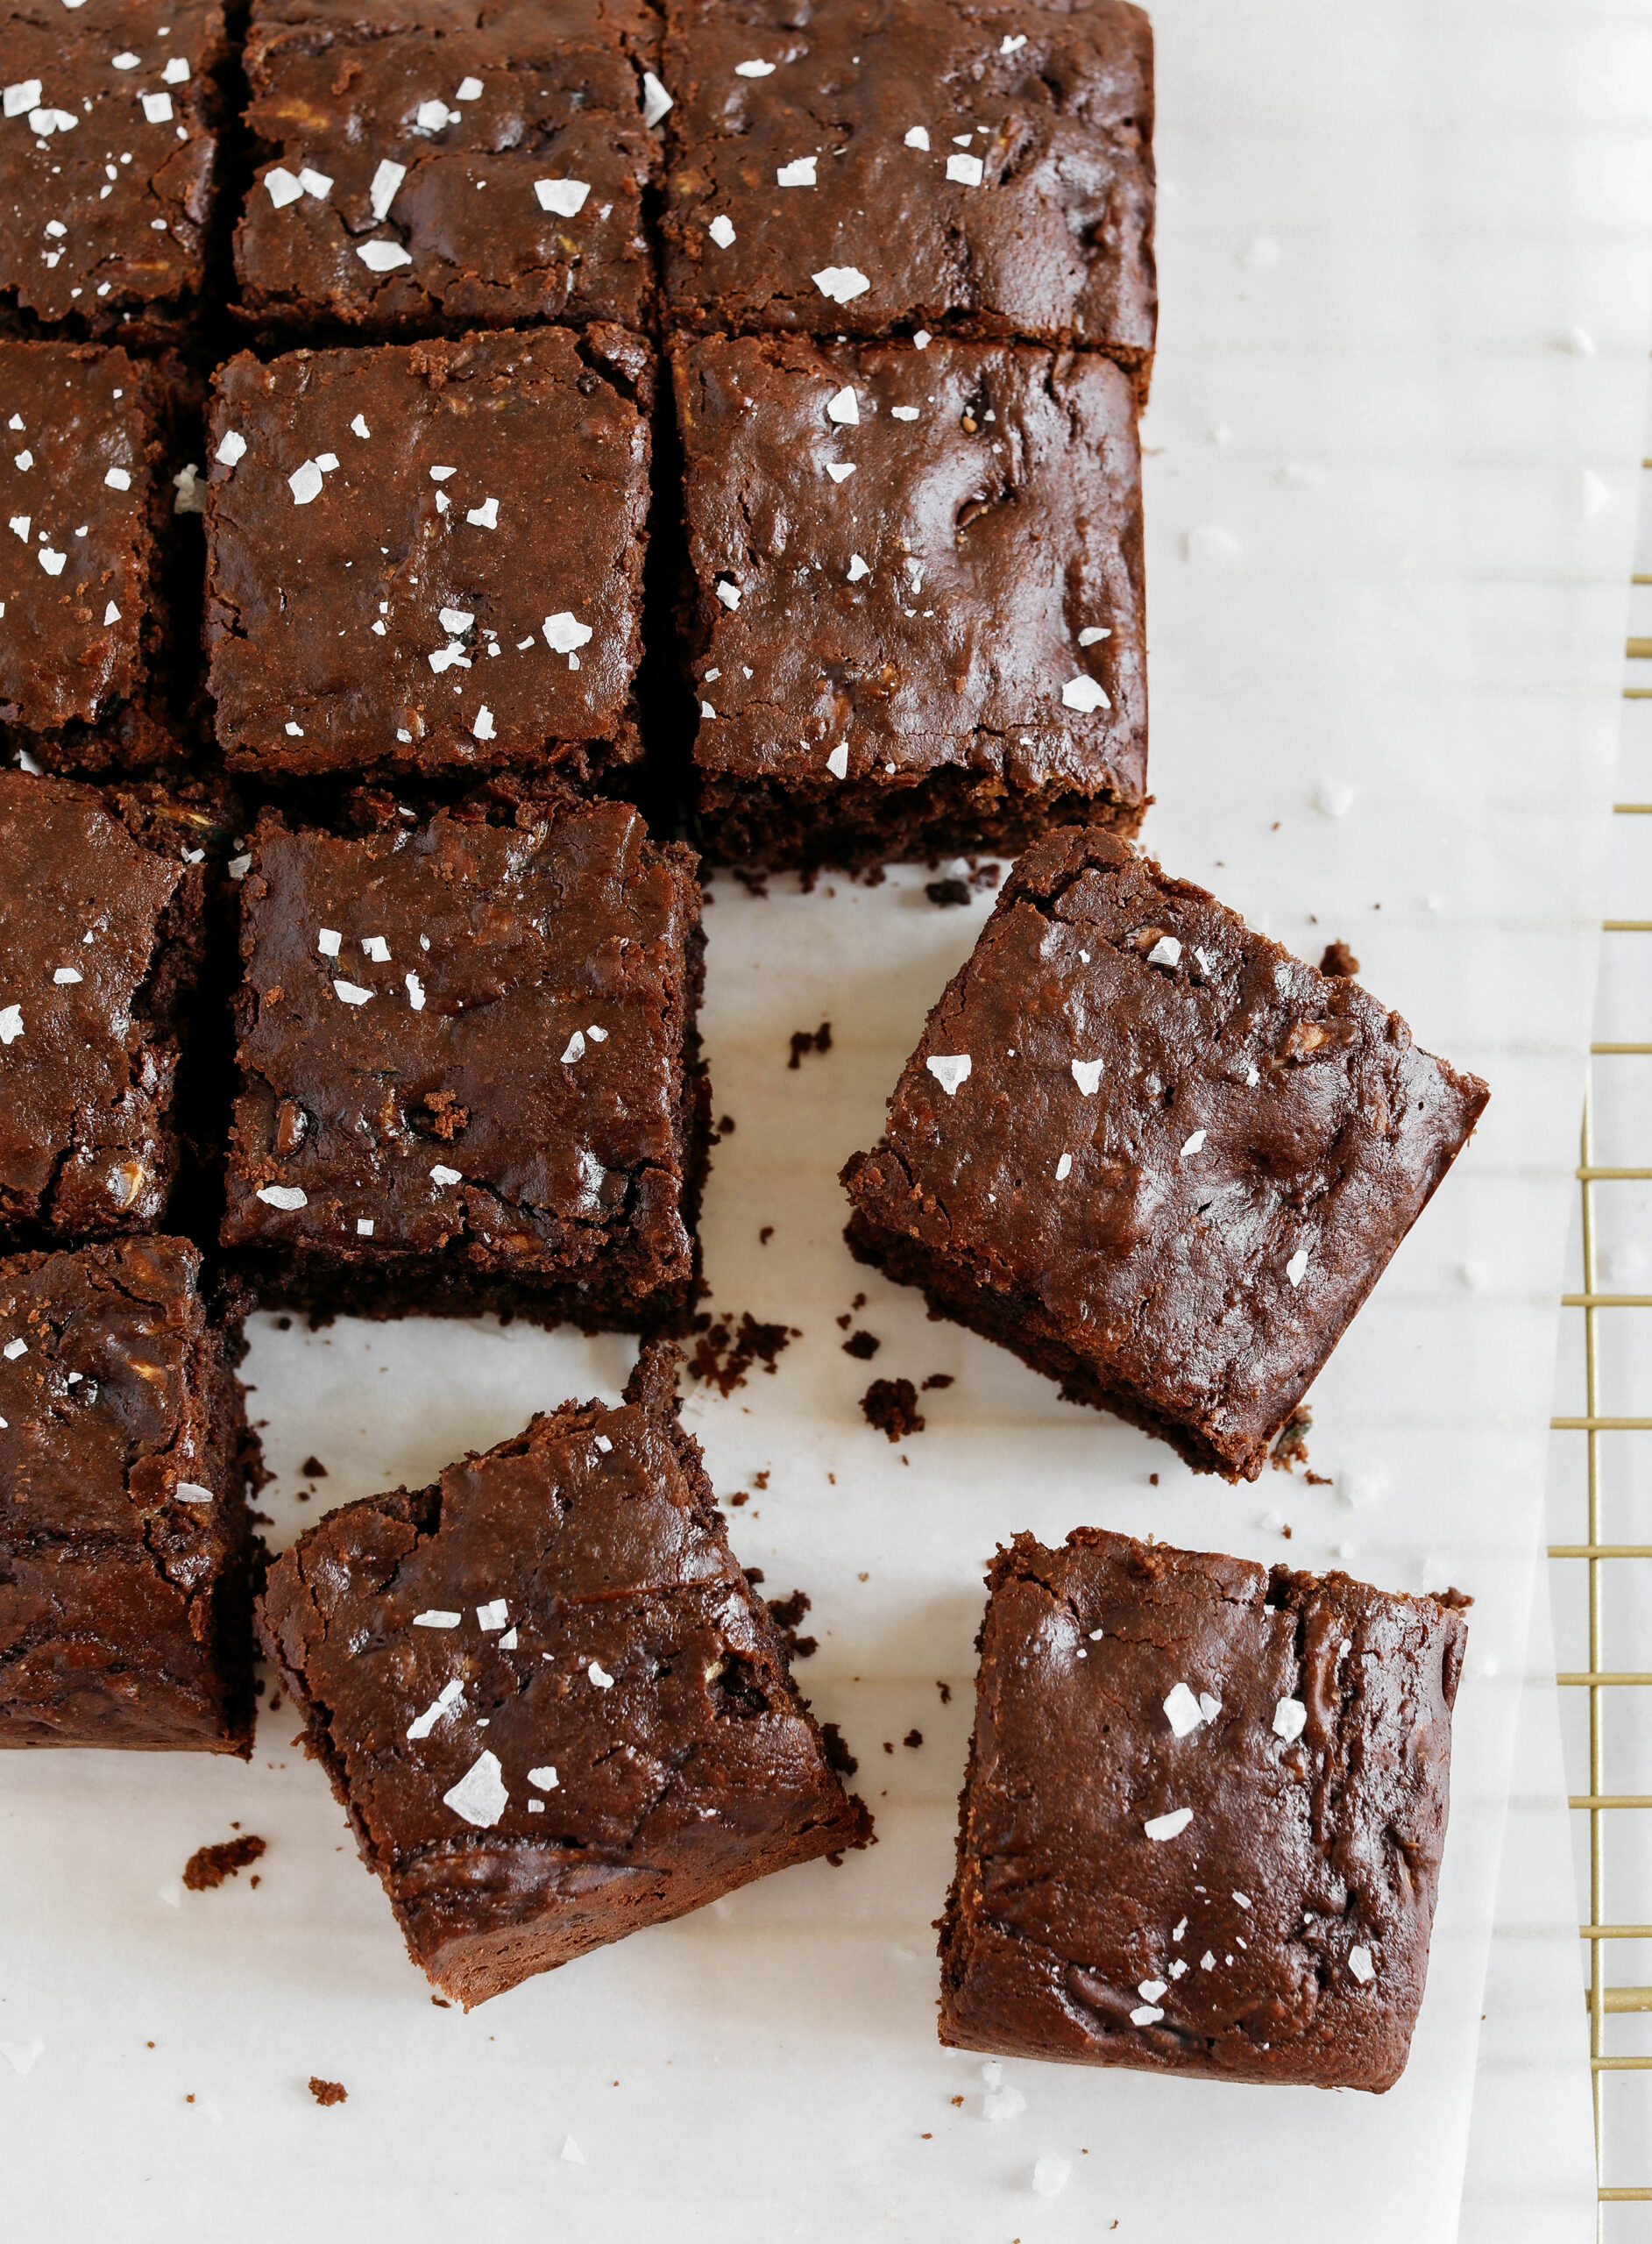 These Fudgy Zucchini Brownies are deliciously moist with a rich chocolate taste loaded with shredded zucchini and made healthier with zero butter or refined sugar!  One of our family's favorite summer desserts!